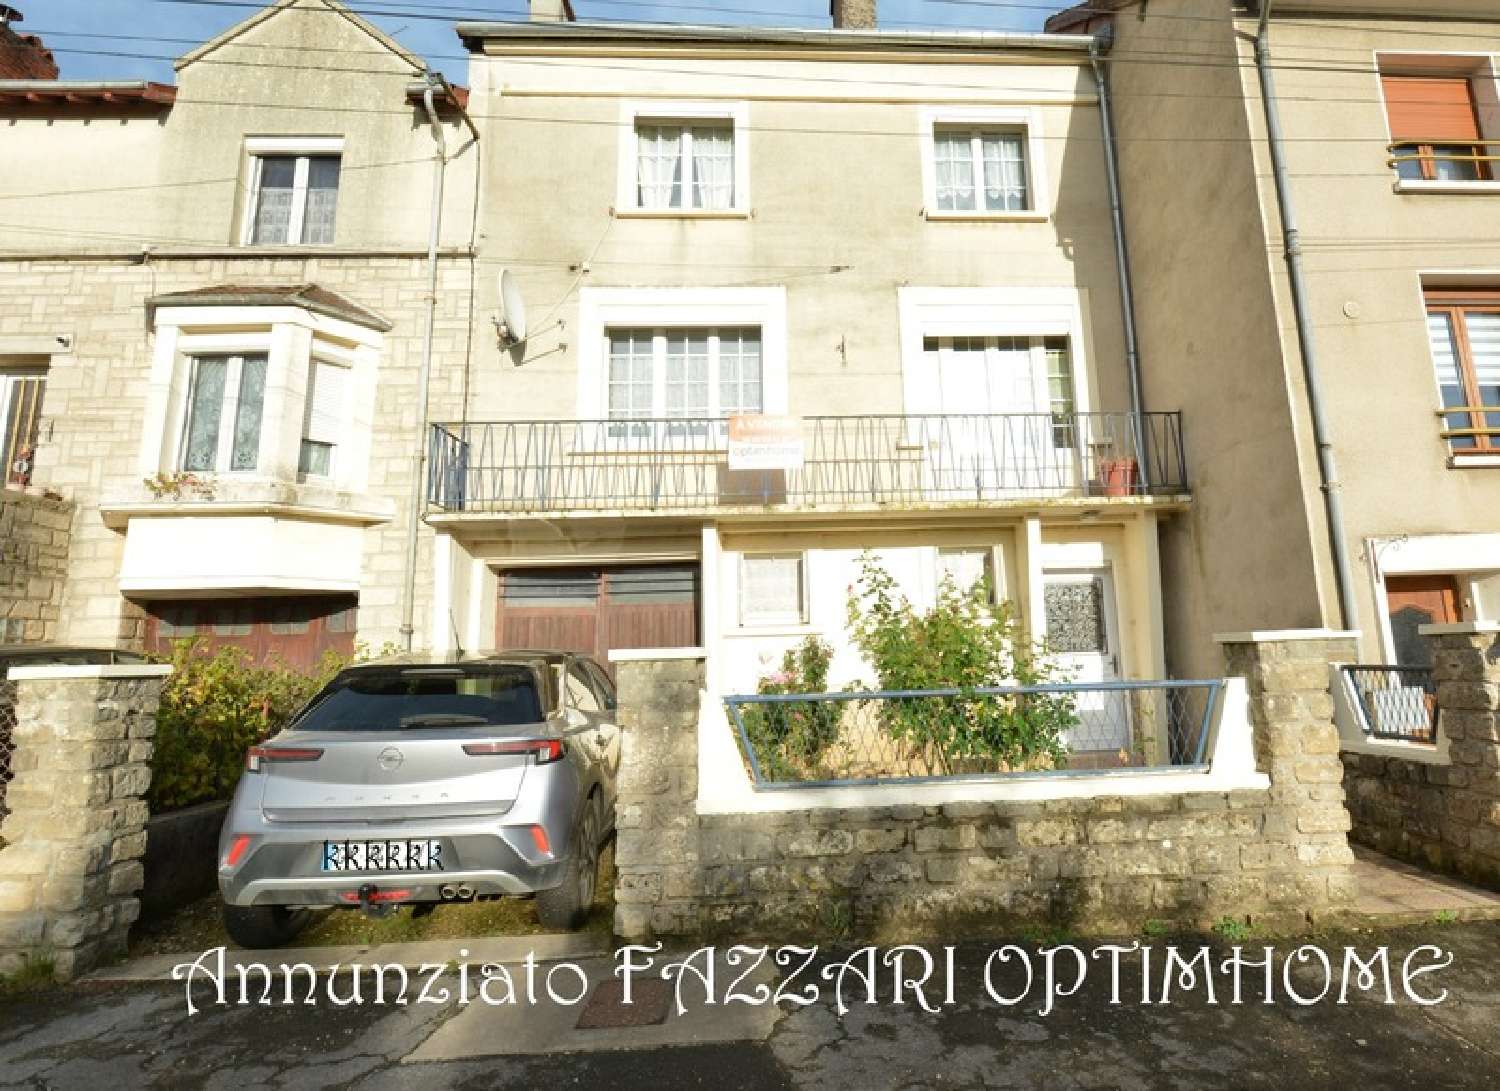  for sale village house Inor Meuse 1